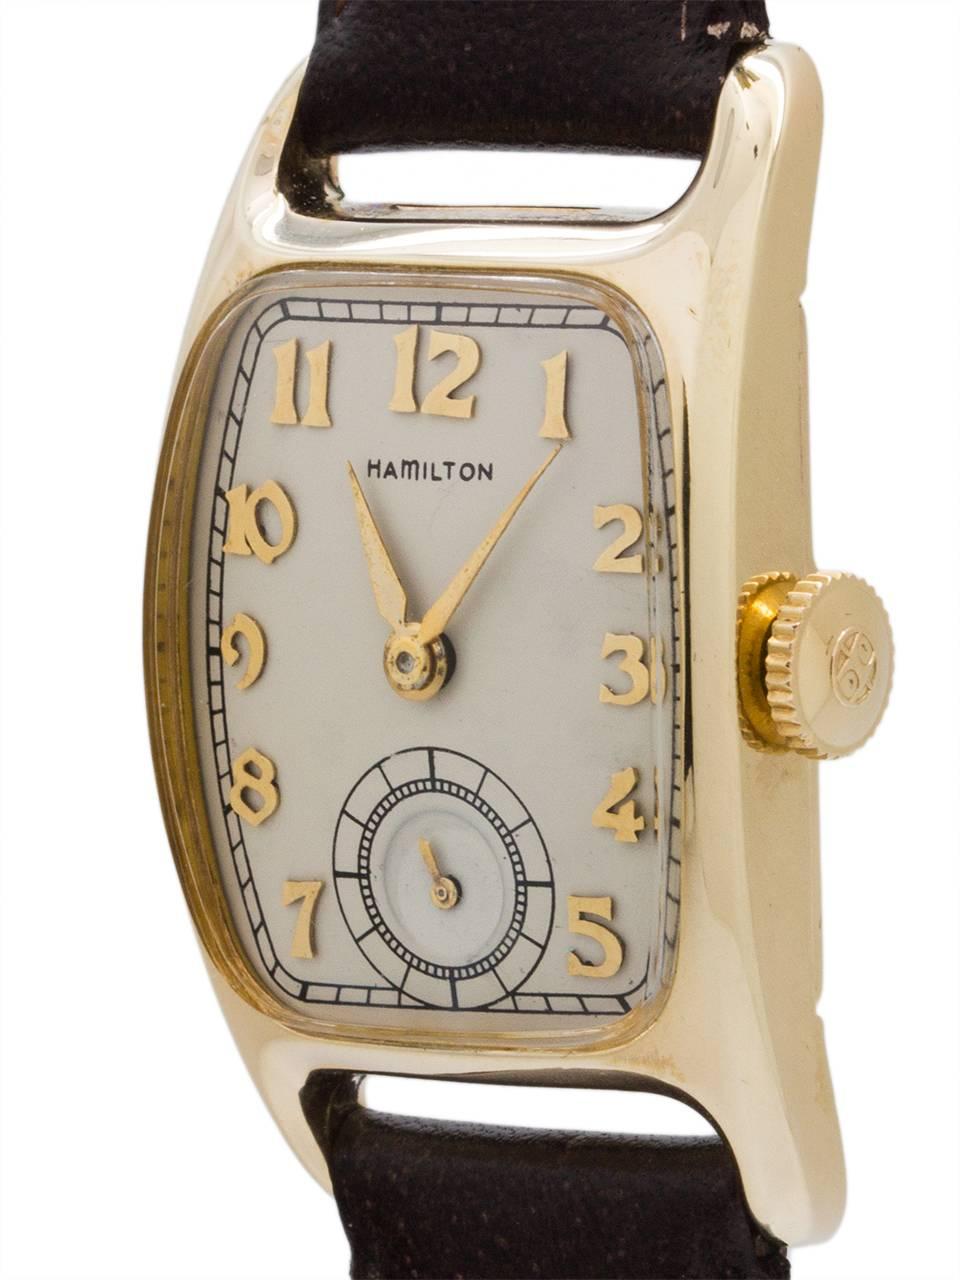 
Hamilton Yellow gold filled Boulton tonneau case classic model circa 1940’s, and the longest production model of all Hamilton wristwatches (1938-1951). Contoured tonneau shaped case, beautifully restored silvered satin dial with 18K gold applied